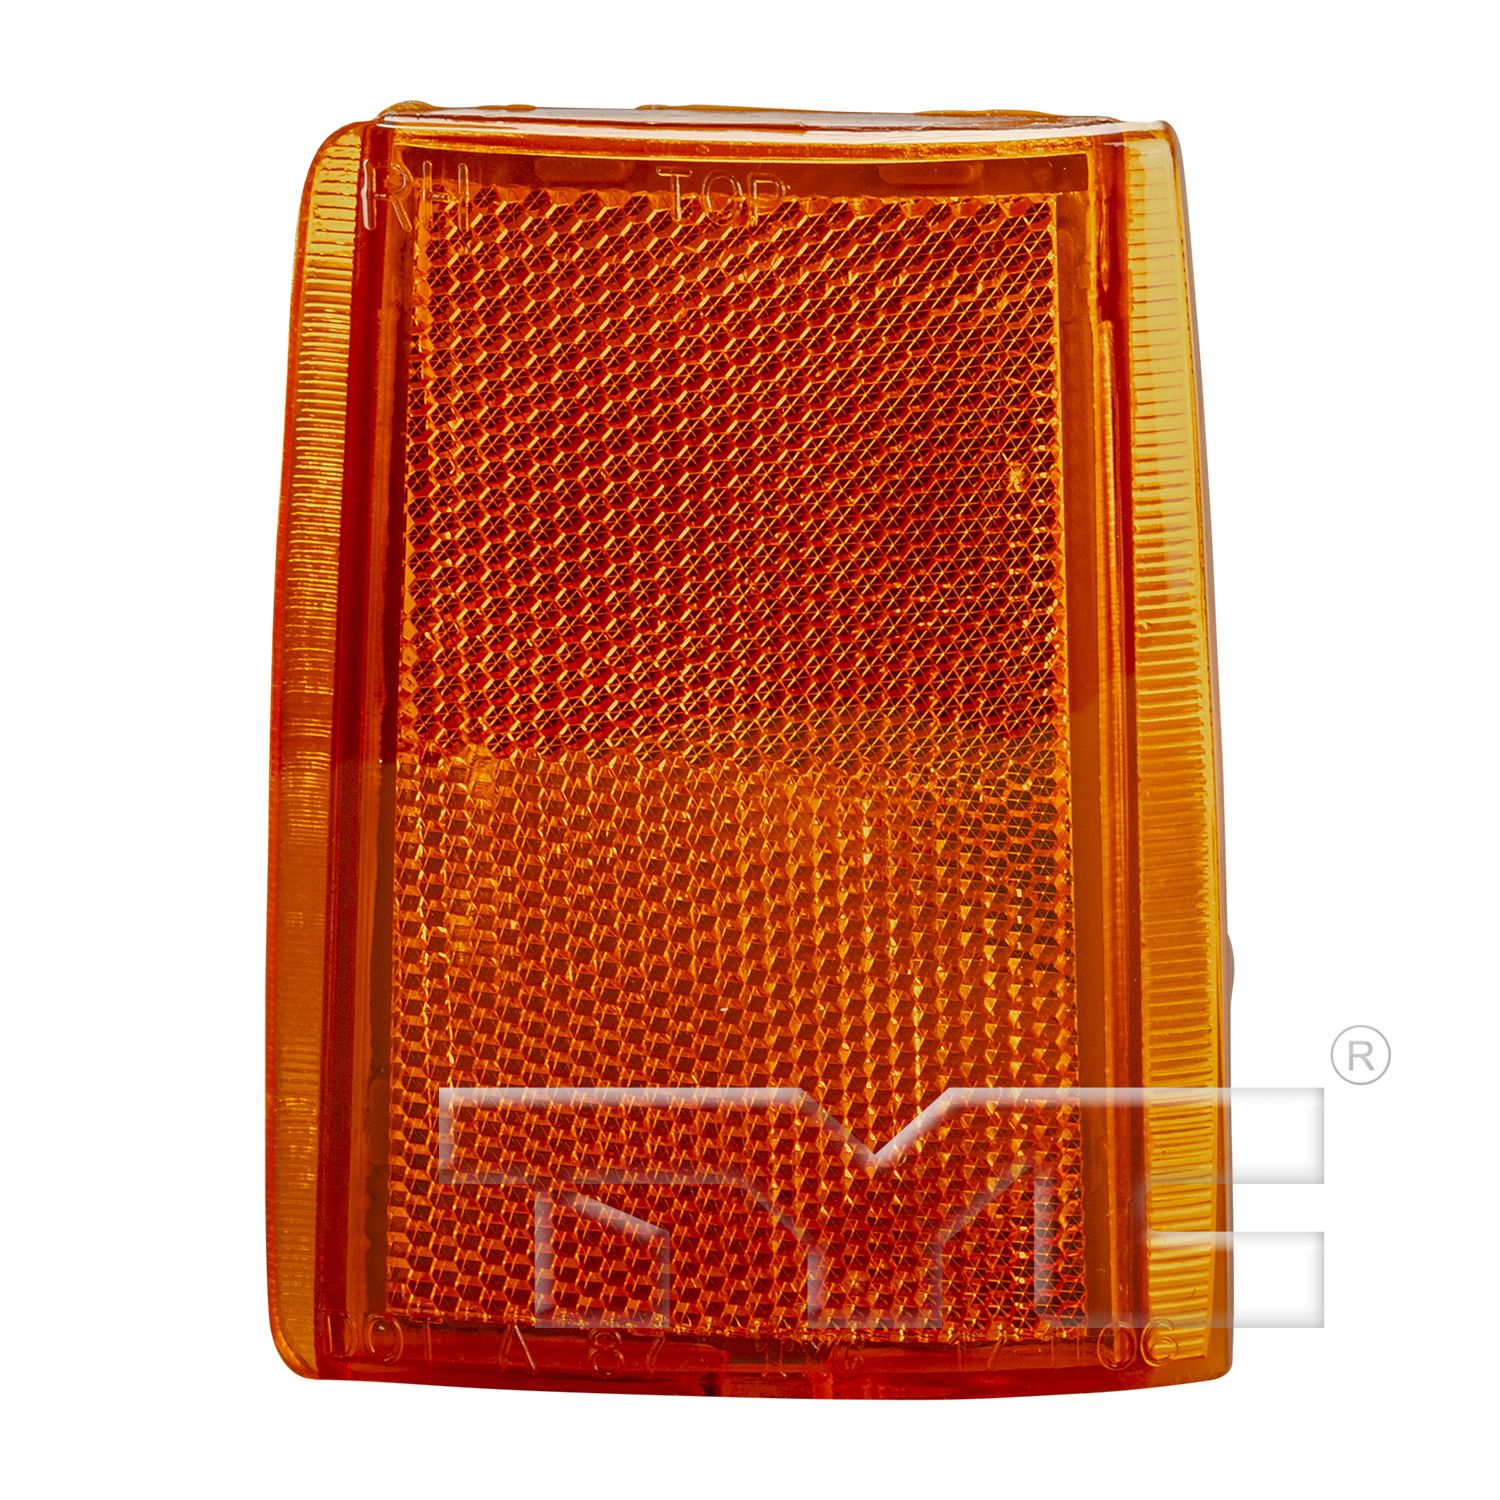 Aftermarket LAMPS for CHEVROLET - C1500 SUBURBAN, C1500 SUBURBAN,92-93,RT Front side reflector